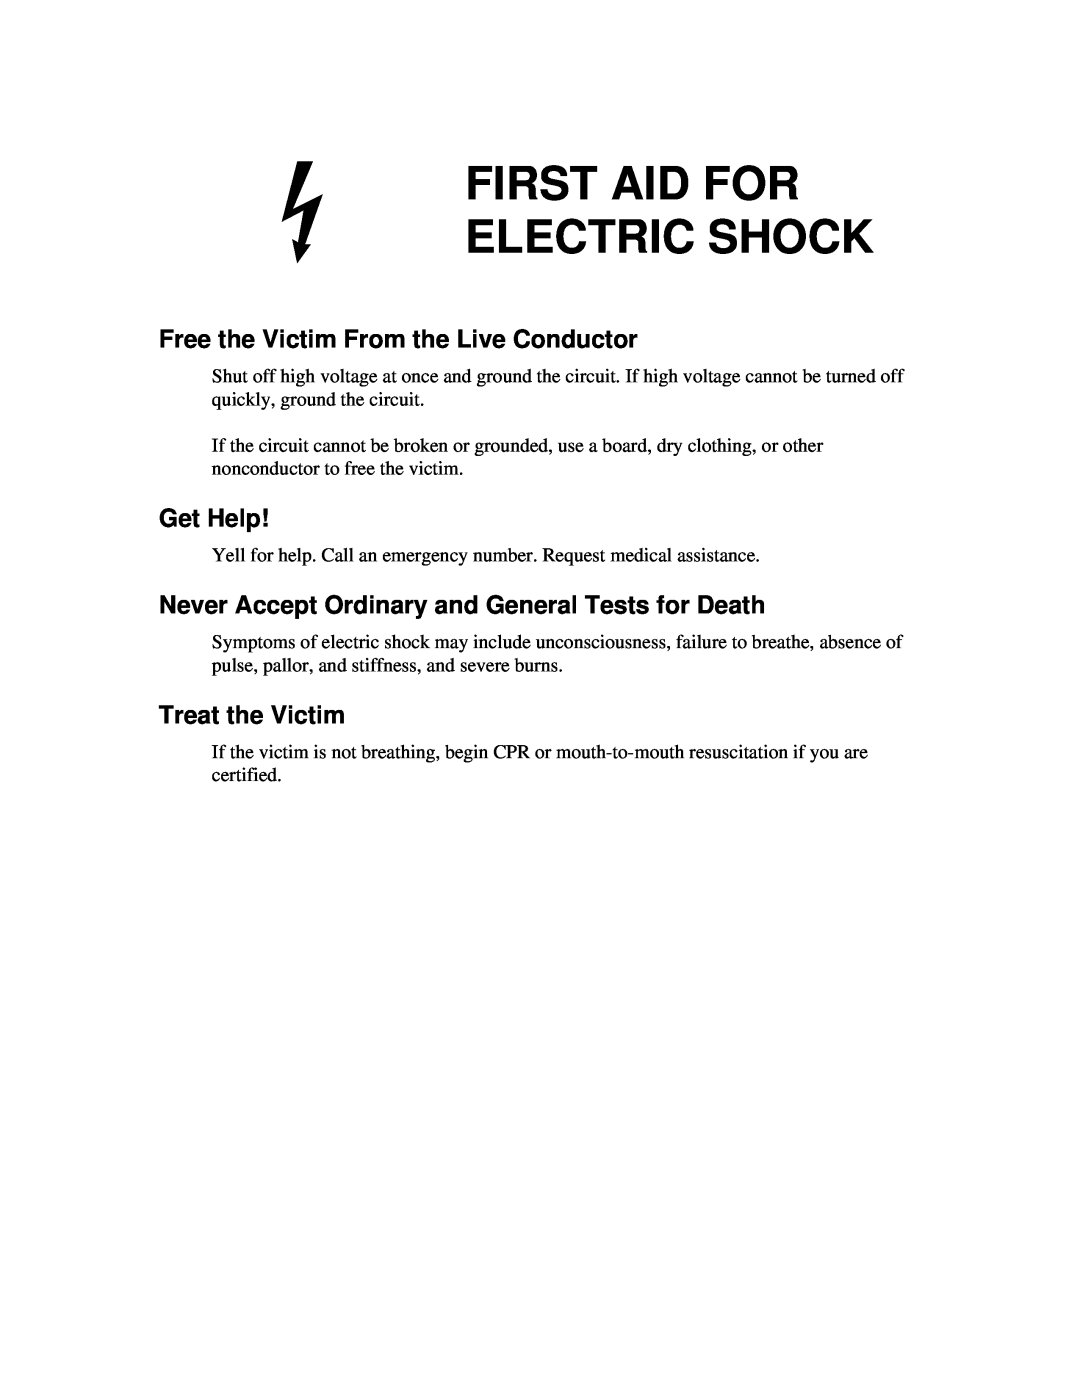 Fluke 5720A First Aid For Electric Shock, Free the Victim From the Live Conductor, Get Help, Treat the Victim 